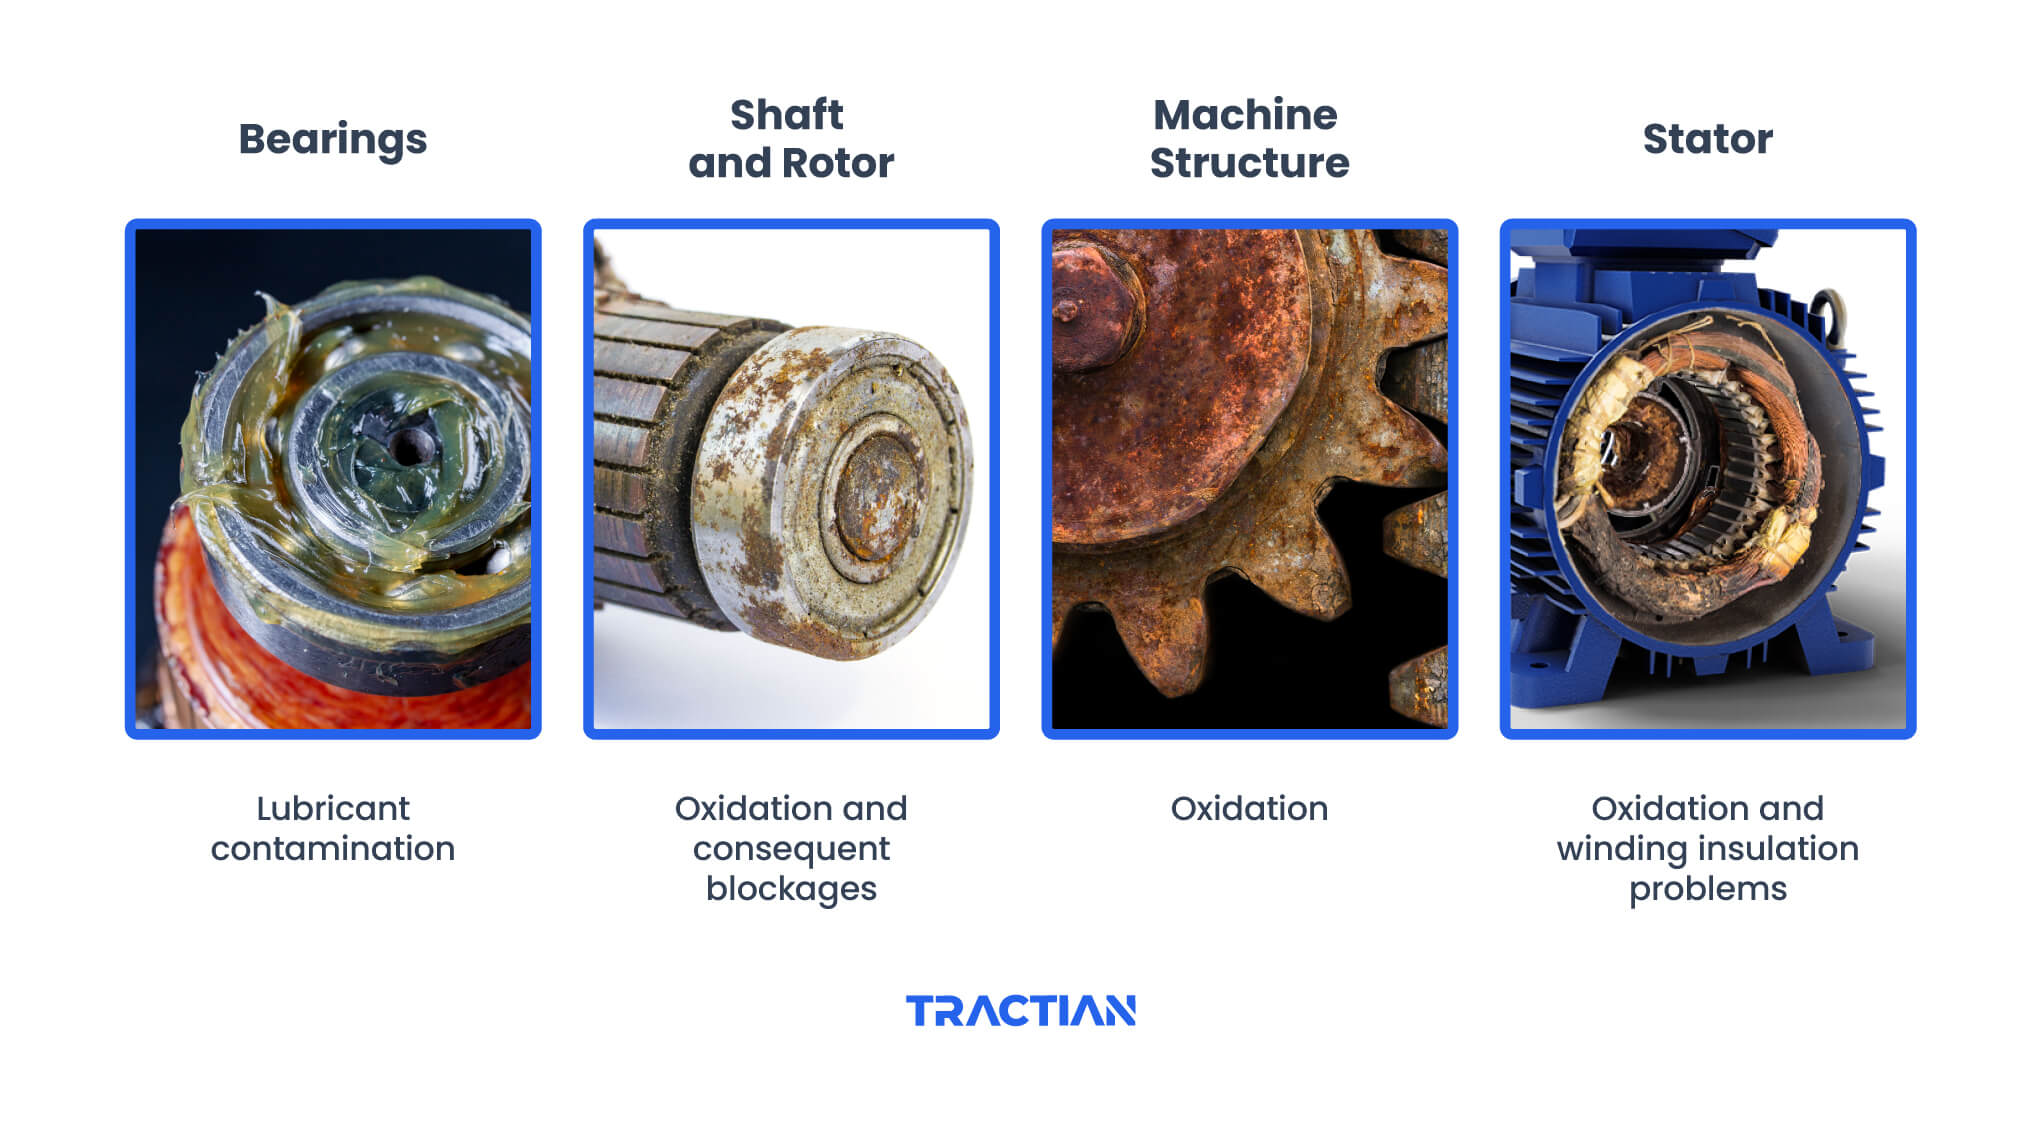 Images of assets that can be damaged by too much humidity - bearings, shaft and rotor, machine structure, and stator